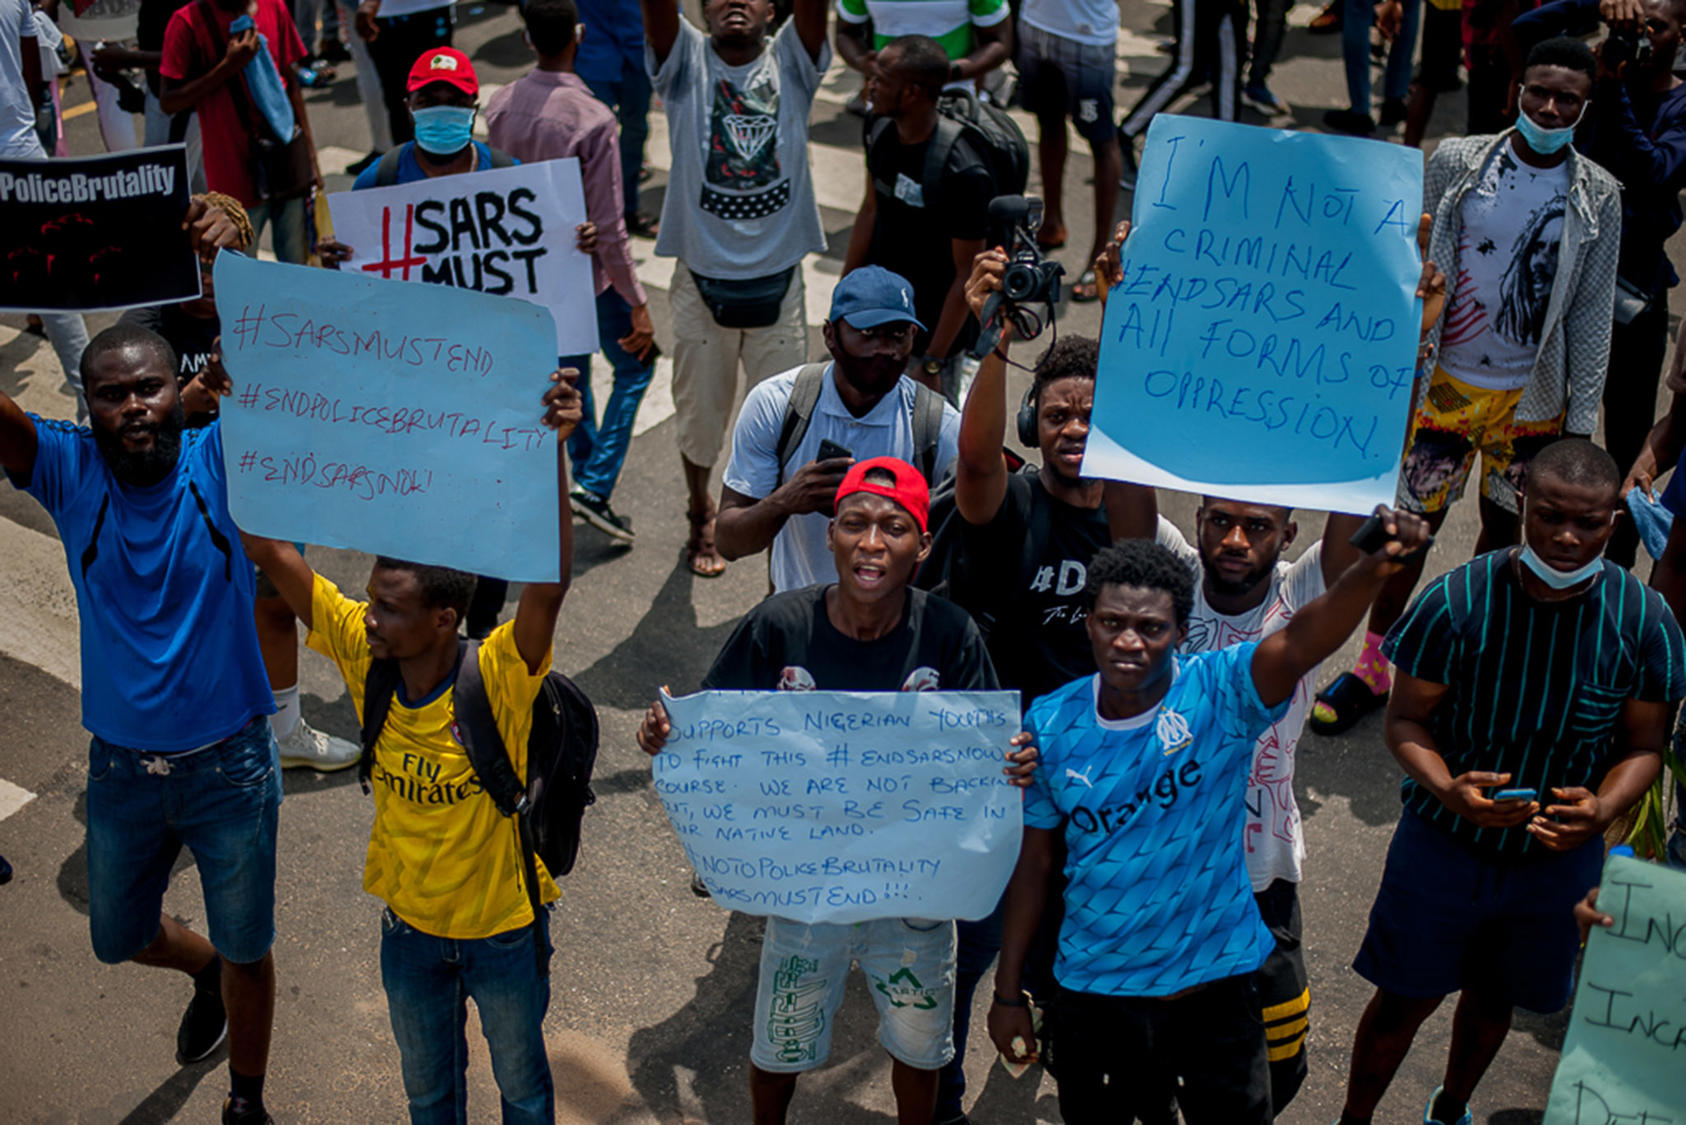 Protesters in Lagos, Nigeria call for the dissolution of the Special Anti-Robbery Squad, Oct. 13, 2021. (Kaizenify/CC License 4.0)